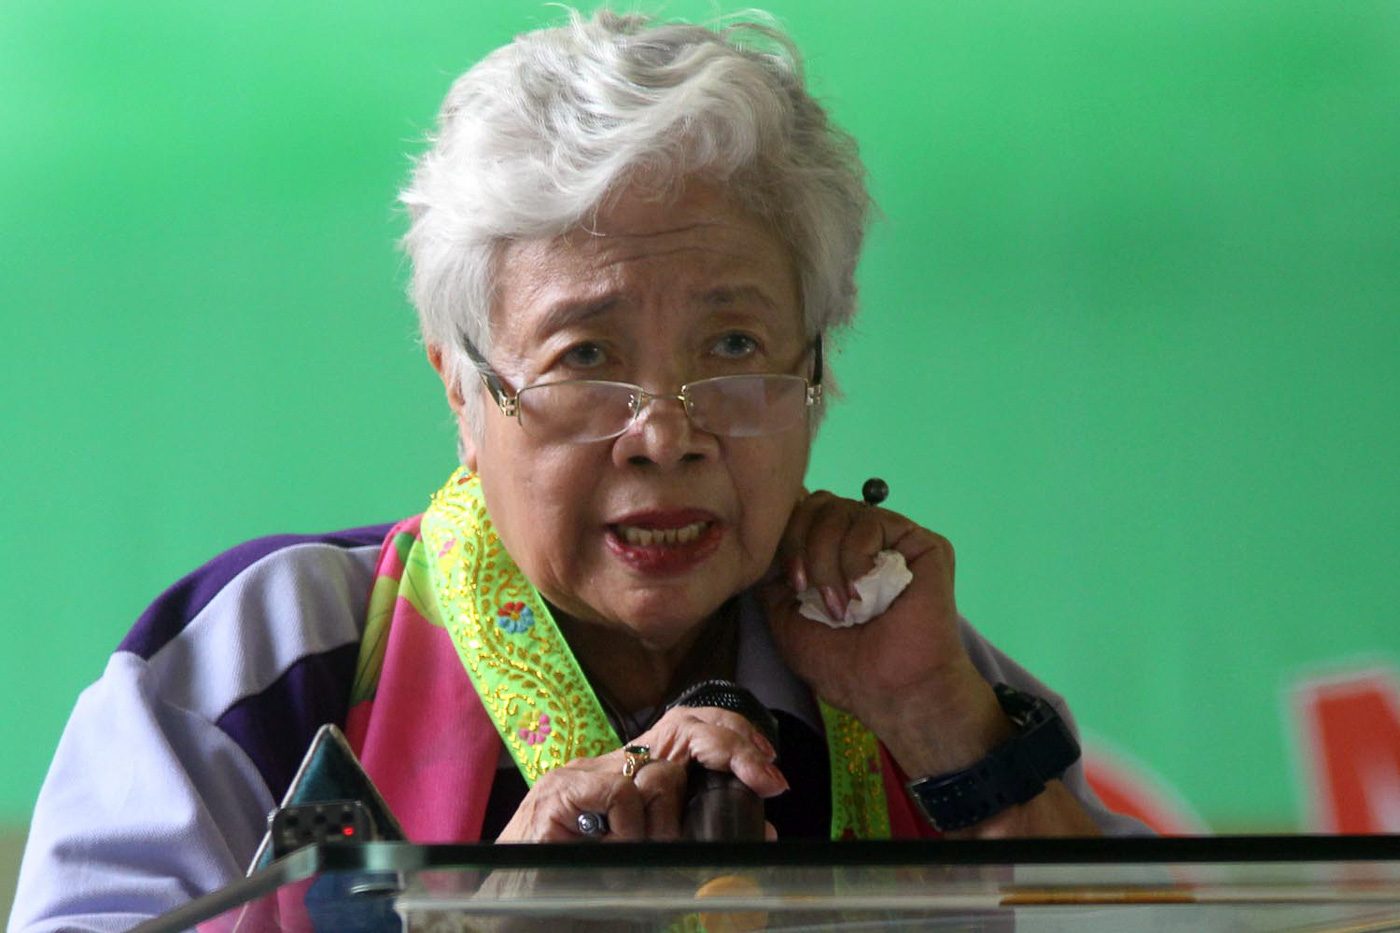 Random tests enough to prevent drug use among students – Briones